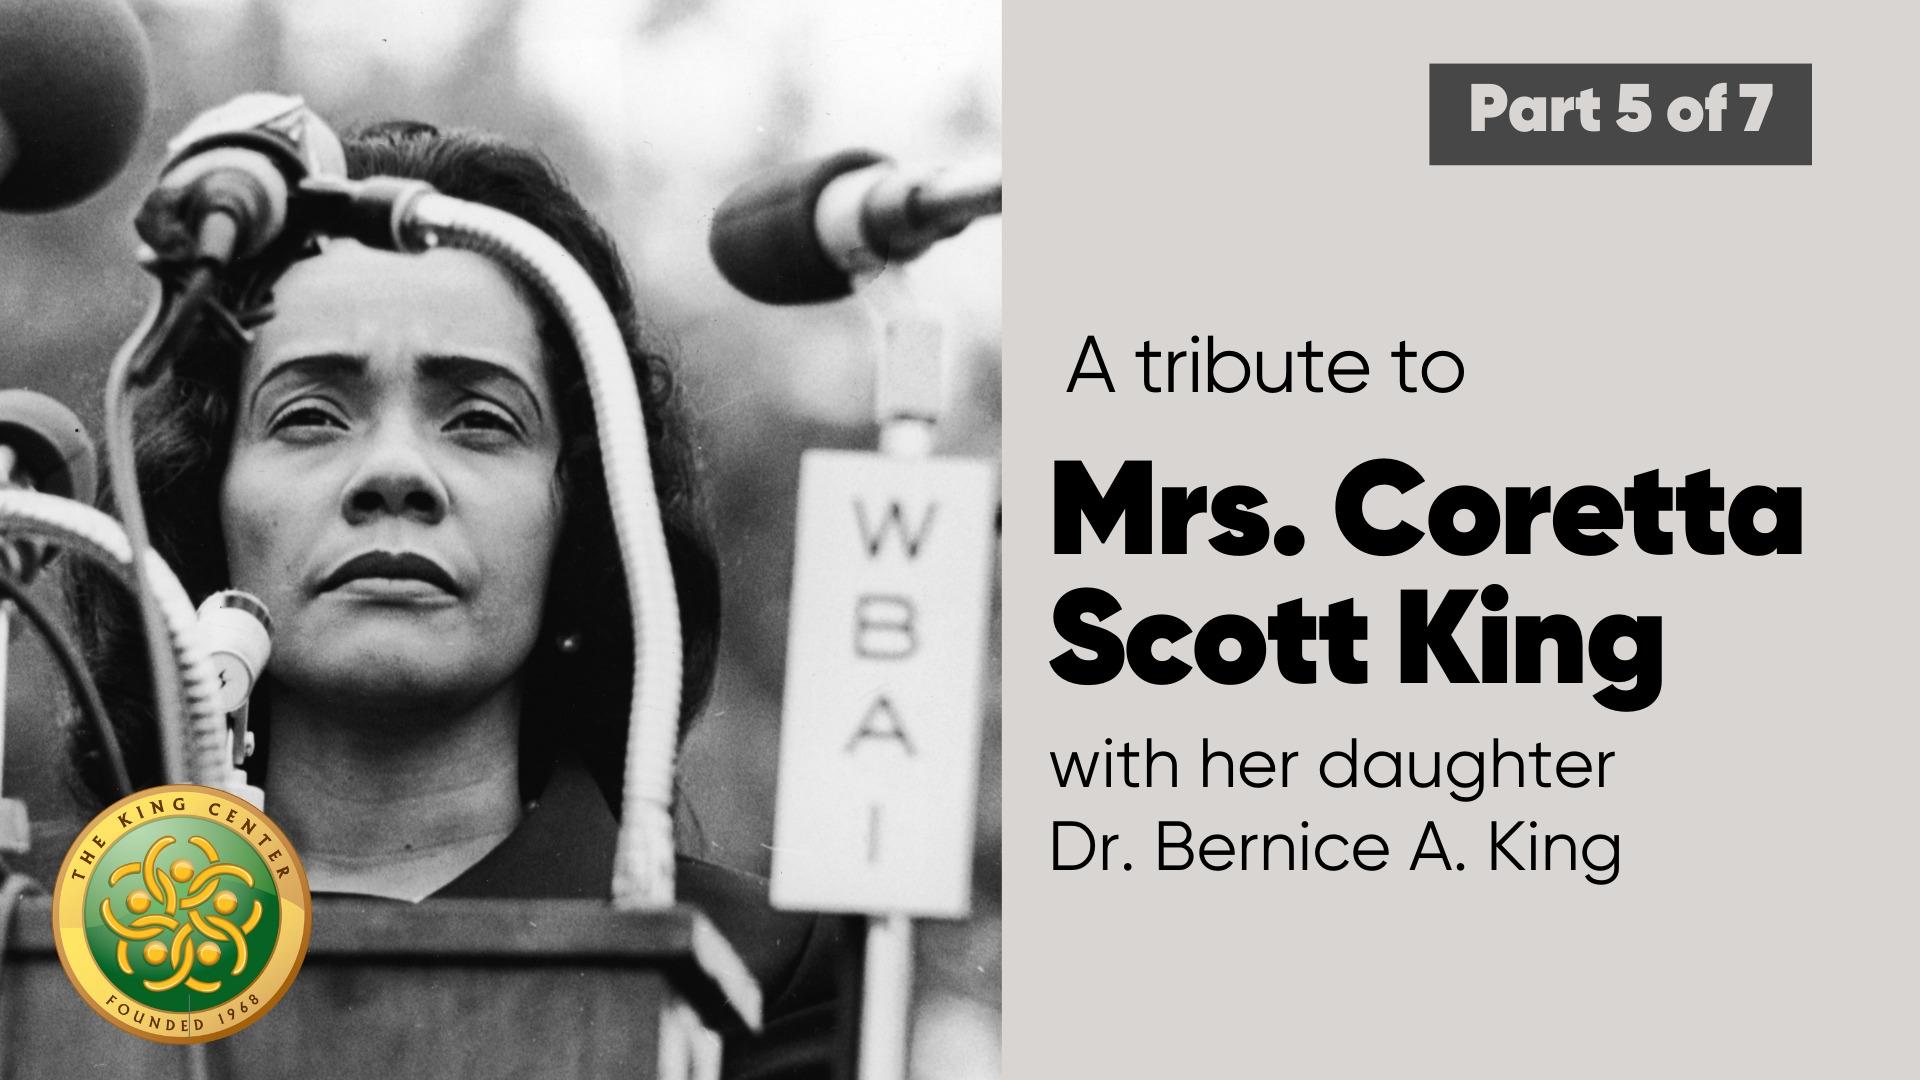 A tribute to Mrs. Coretta Scott King with her daughter Dr. Bernice A. King- Part 5 of 7